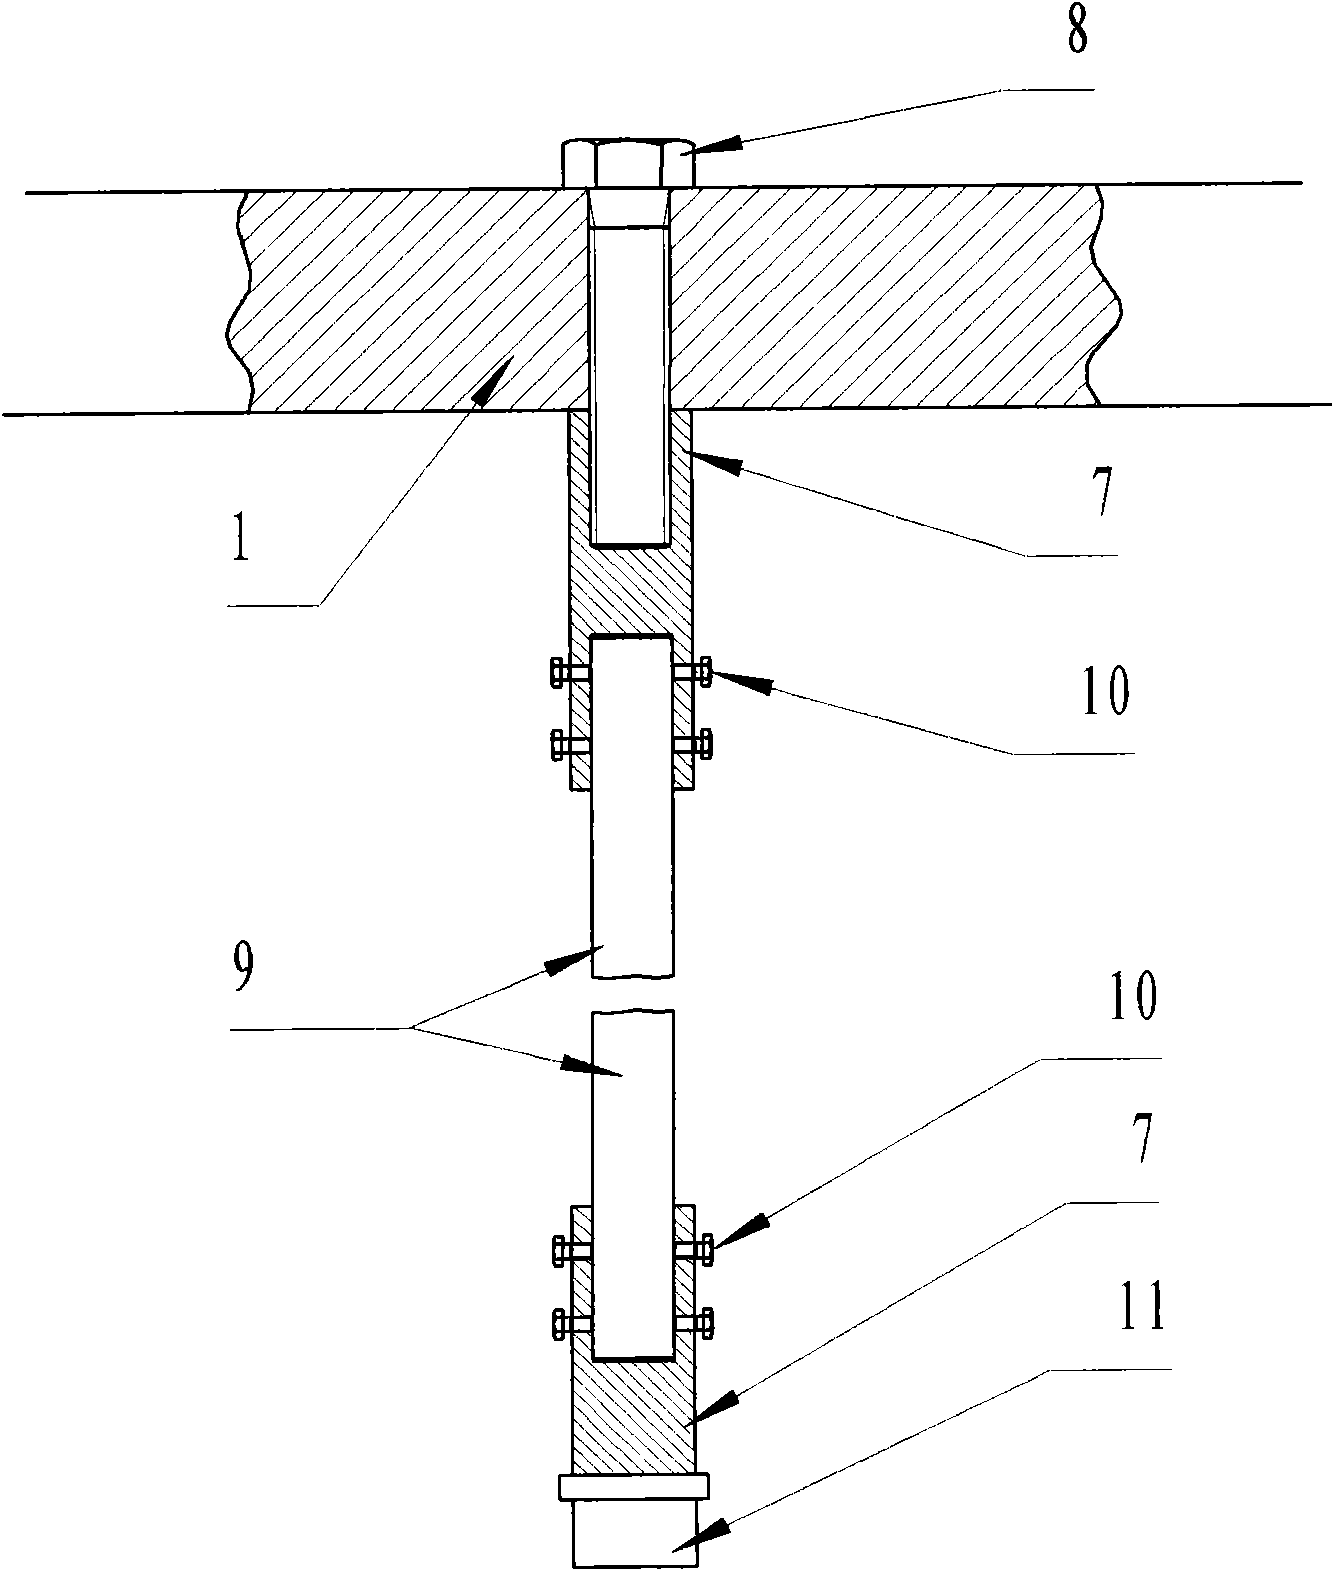 Inherent frequency measuring device for 600 DEG C high-temperature thermal vibration coupling test of high-speed cruise missile airfoil surface